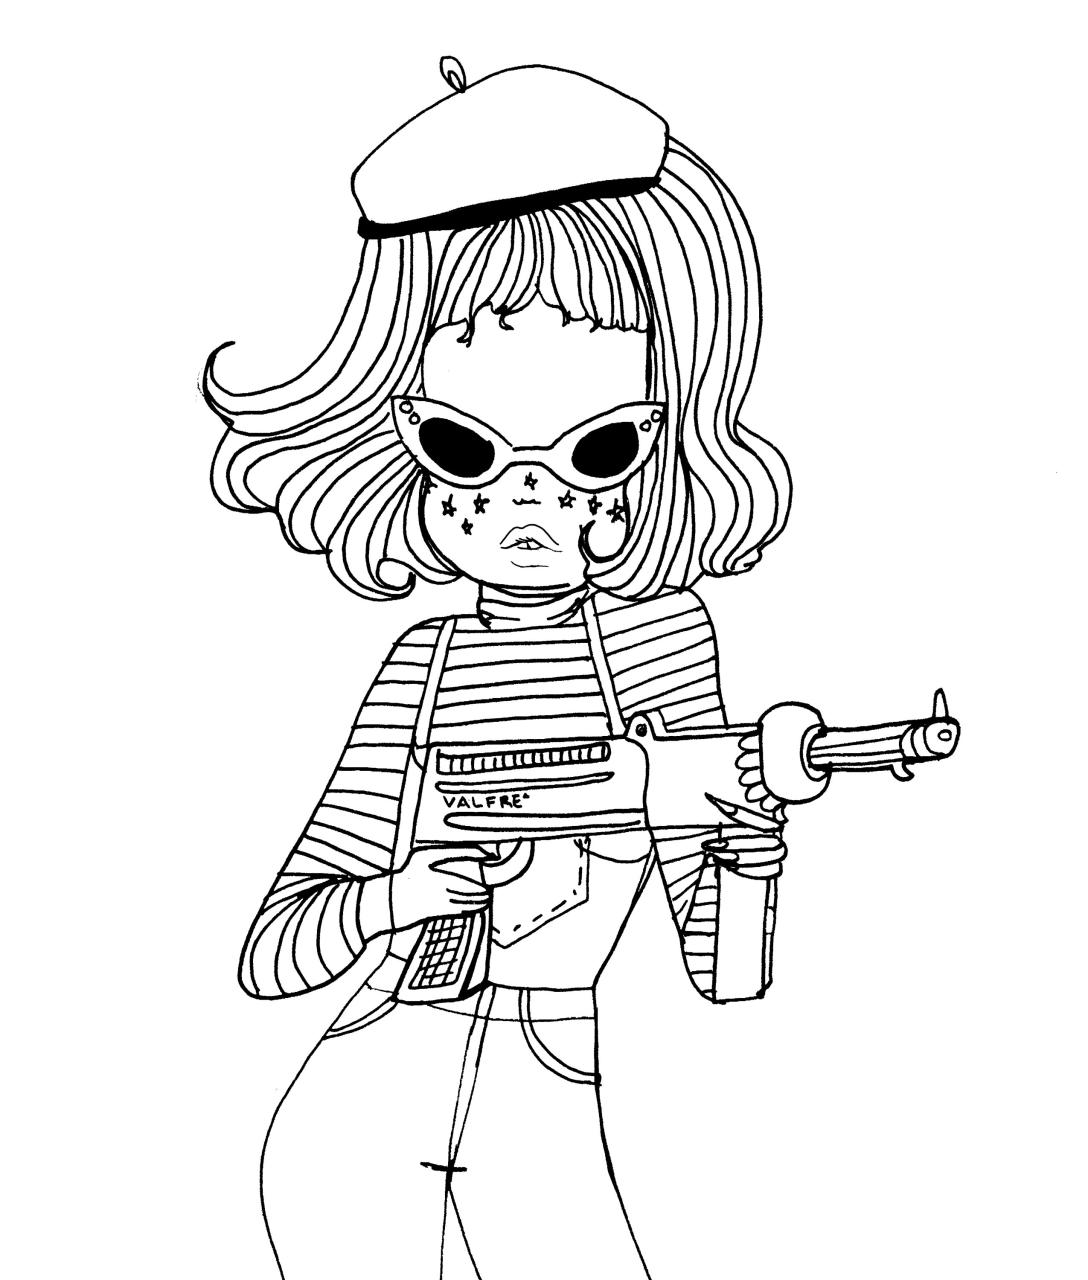 Person Coloring Page at Free printable colorings